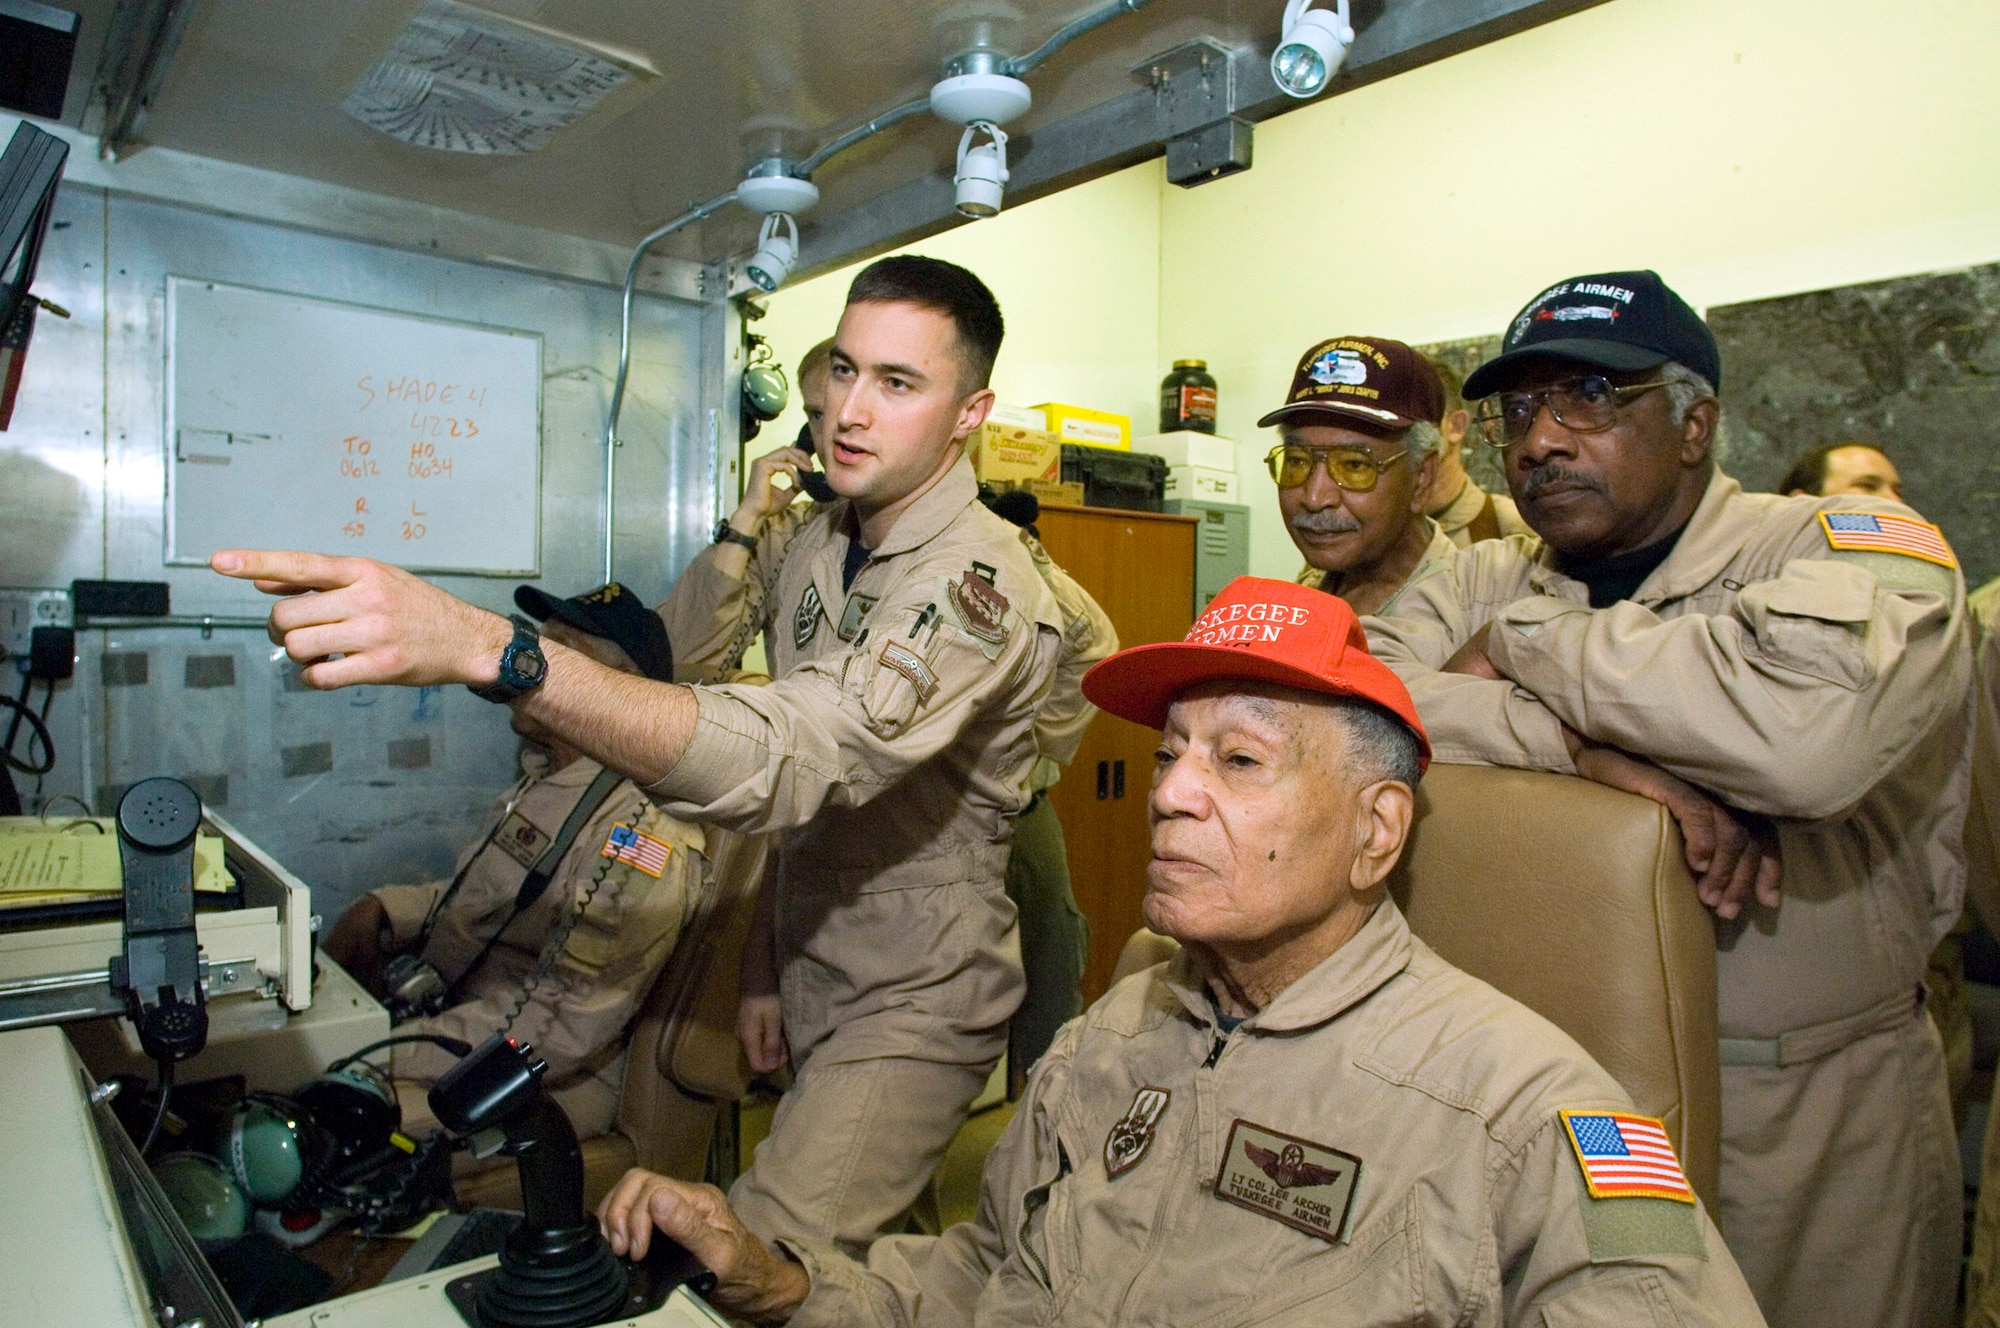 BALAD AIR BASE, Iraq (AFPN) -- Capt. Mark Ferstl (left) explains an unmanned aerial vehicle's ground control station to Tuskegee Airmen retired Lt. Col. Lee Archer (sitting) retired Lt. Col Robert Ashby (back right) and retired Col. Dick Toliver (leaning on the chair). The Tuskegee Airmen are here to meet deployed 332nd Expeditionary Operations Group Airmen and observe operations. The Army created the Tuskegee Airmen unit in 1941.  (U.S. Air Force photo by Master Sgt. John E. Lasky)